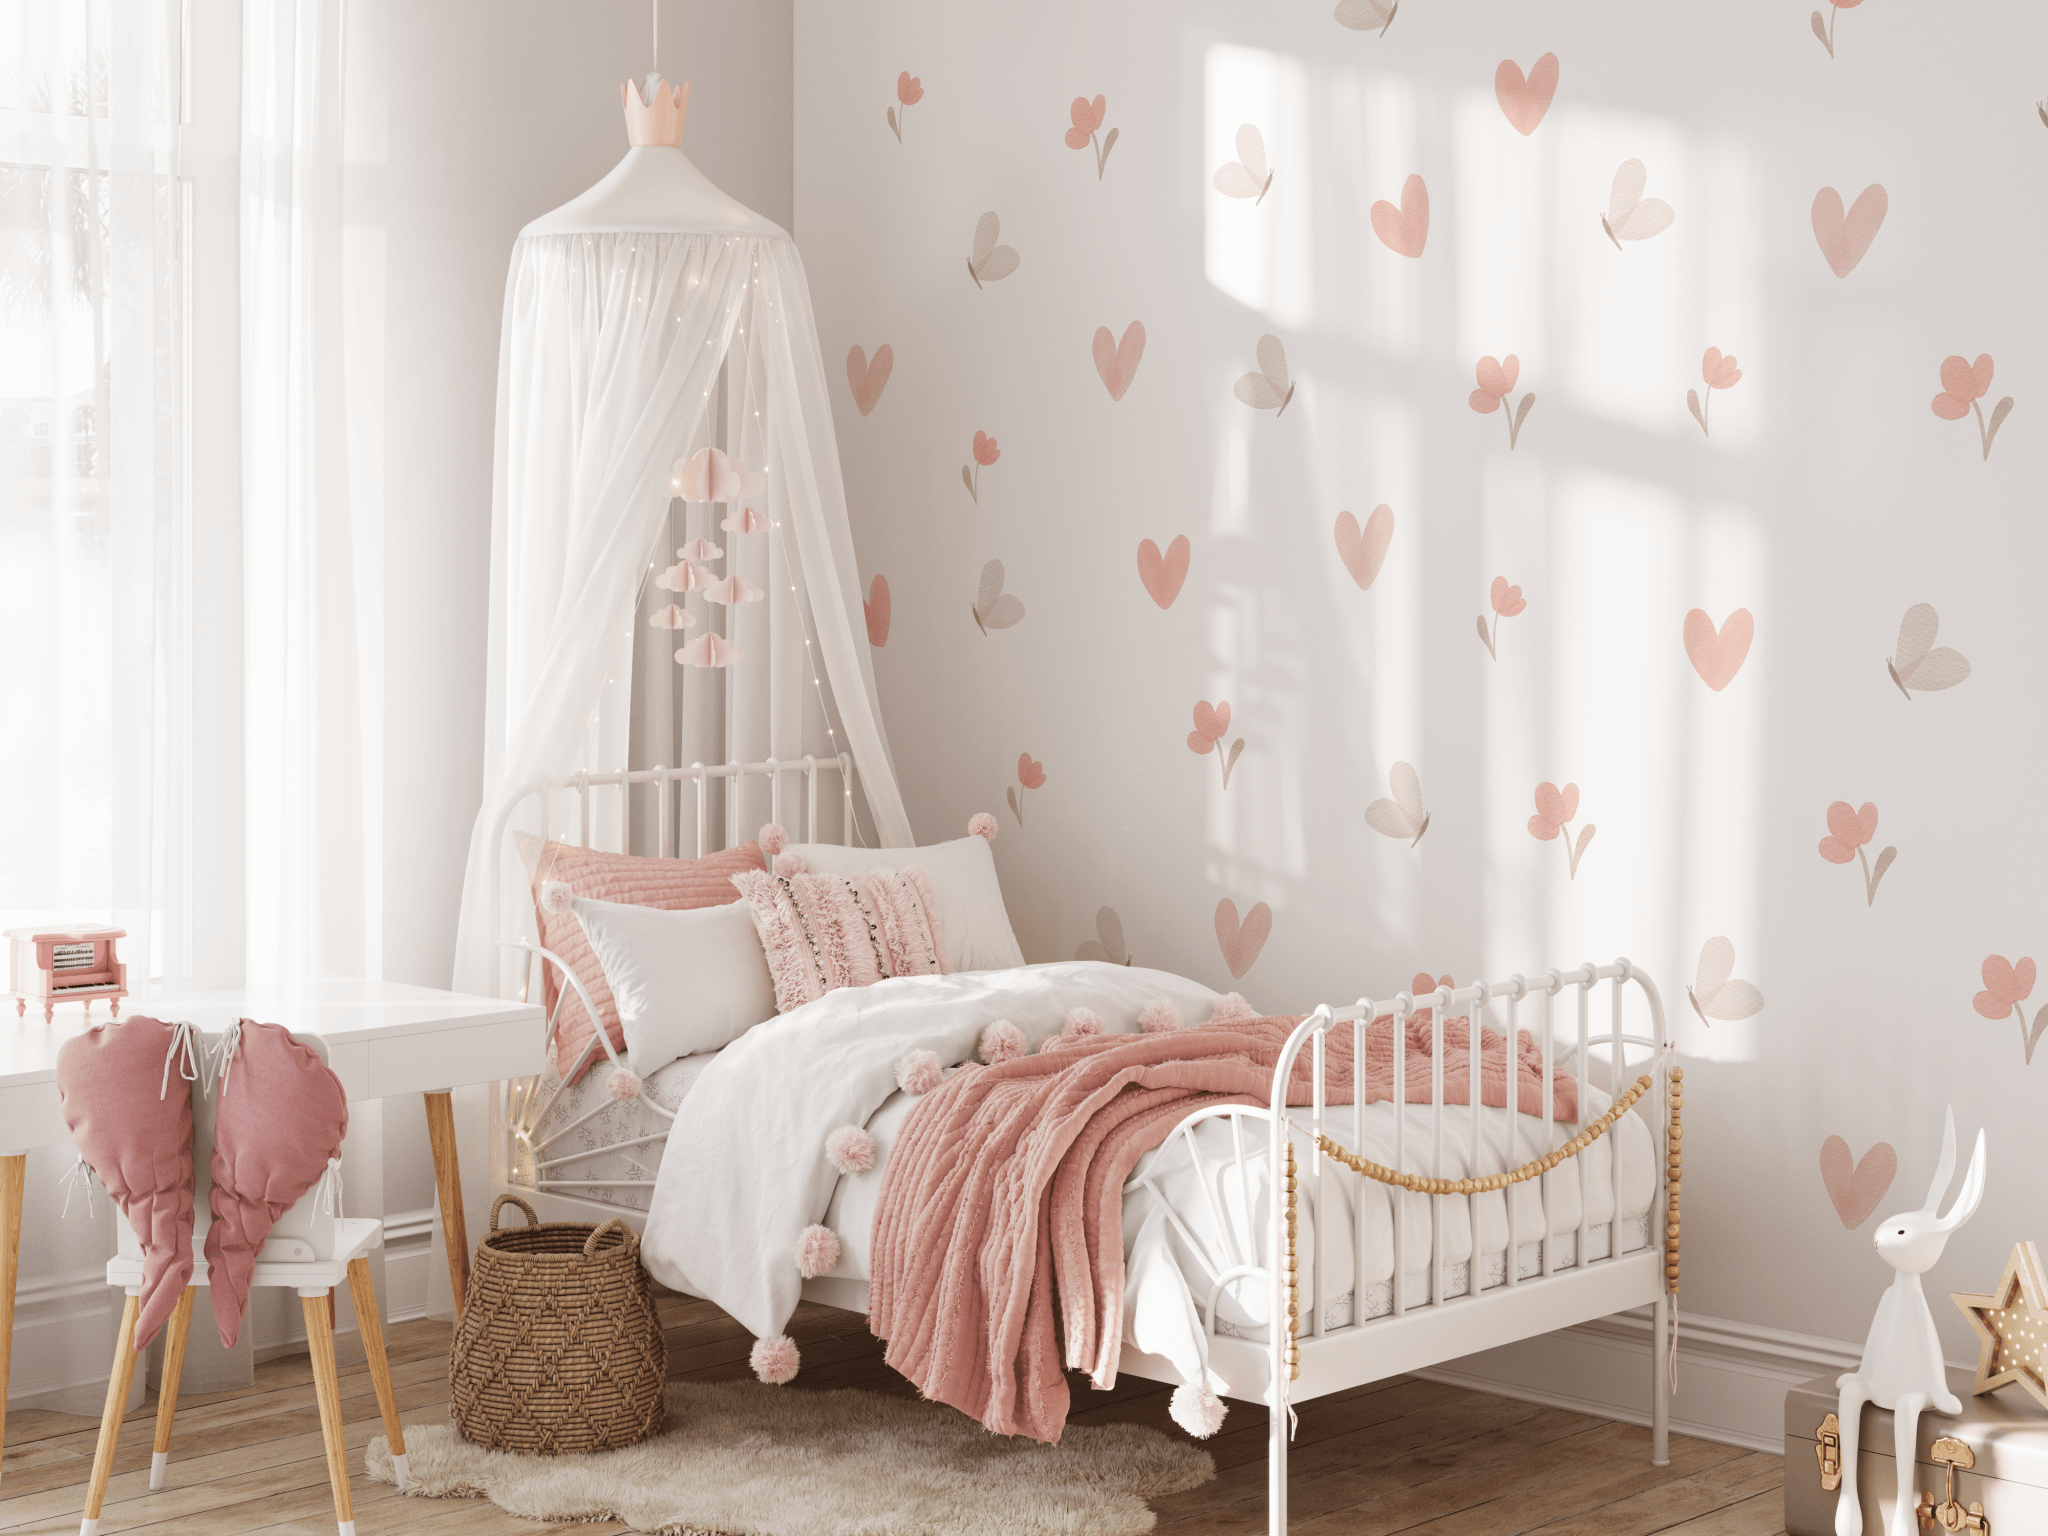 Subtle pink hand painted heart and butterfly wall stickers, removable heart and butterfly wall decals 